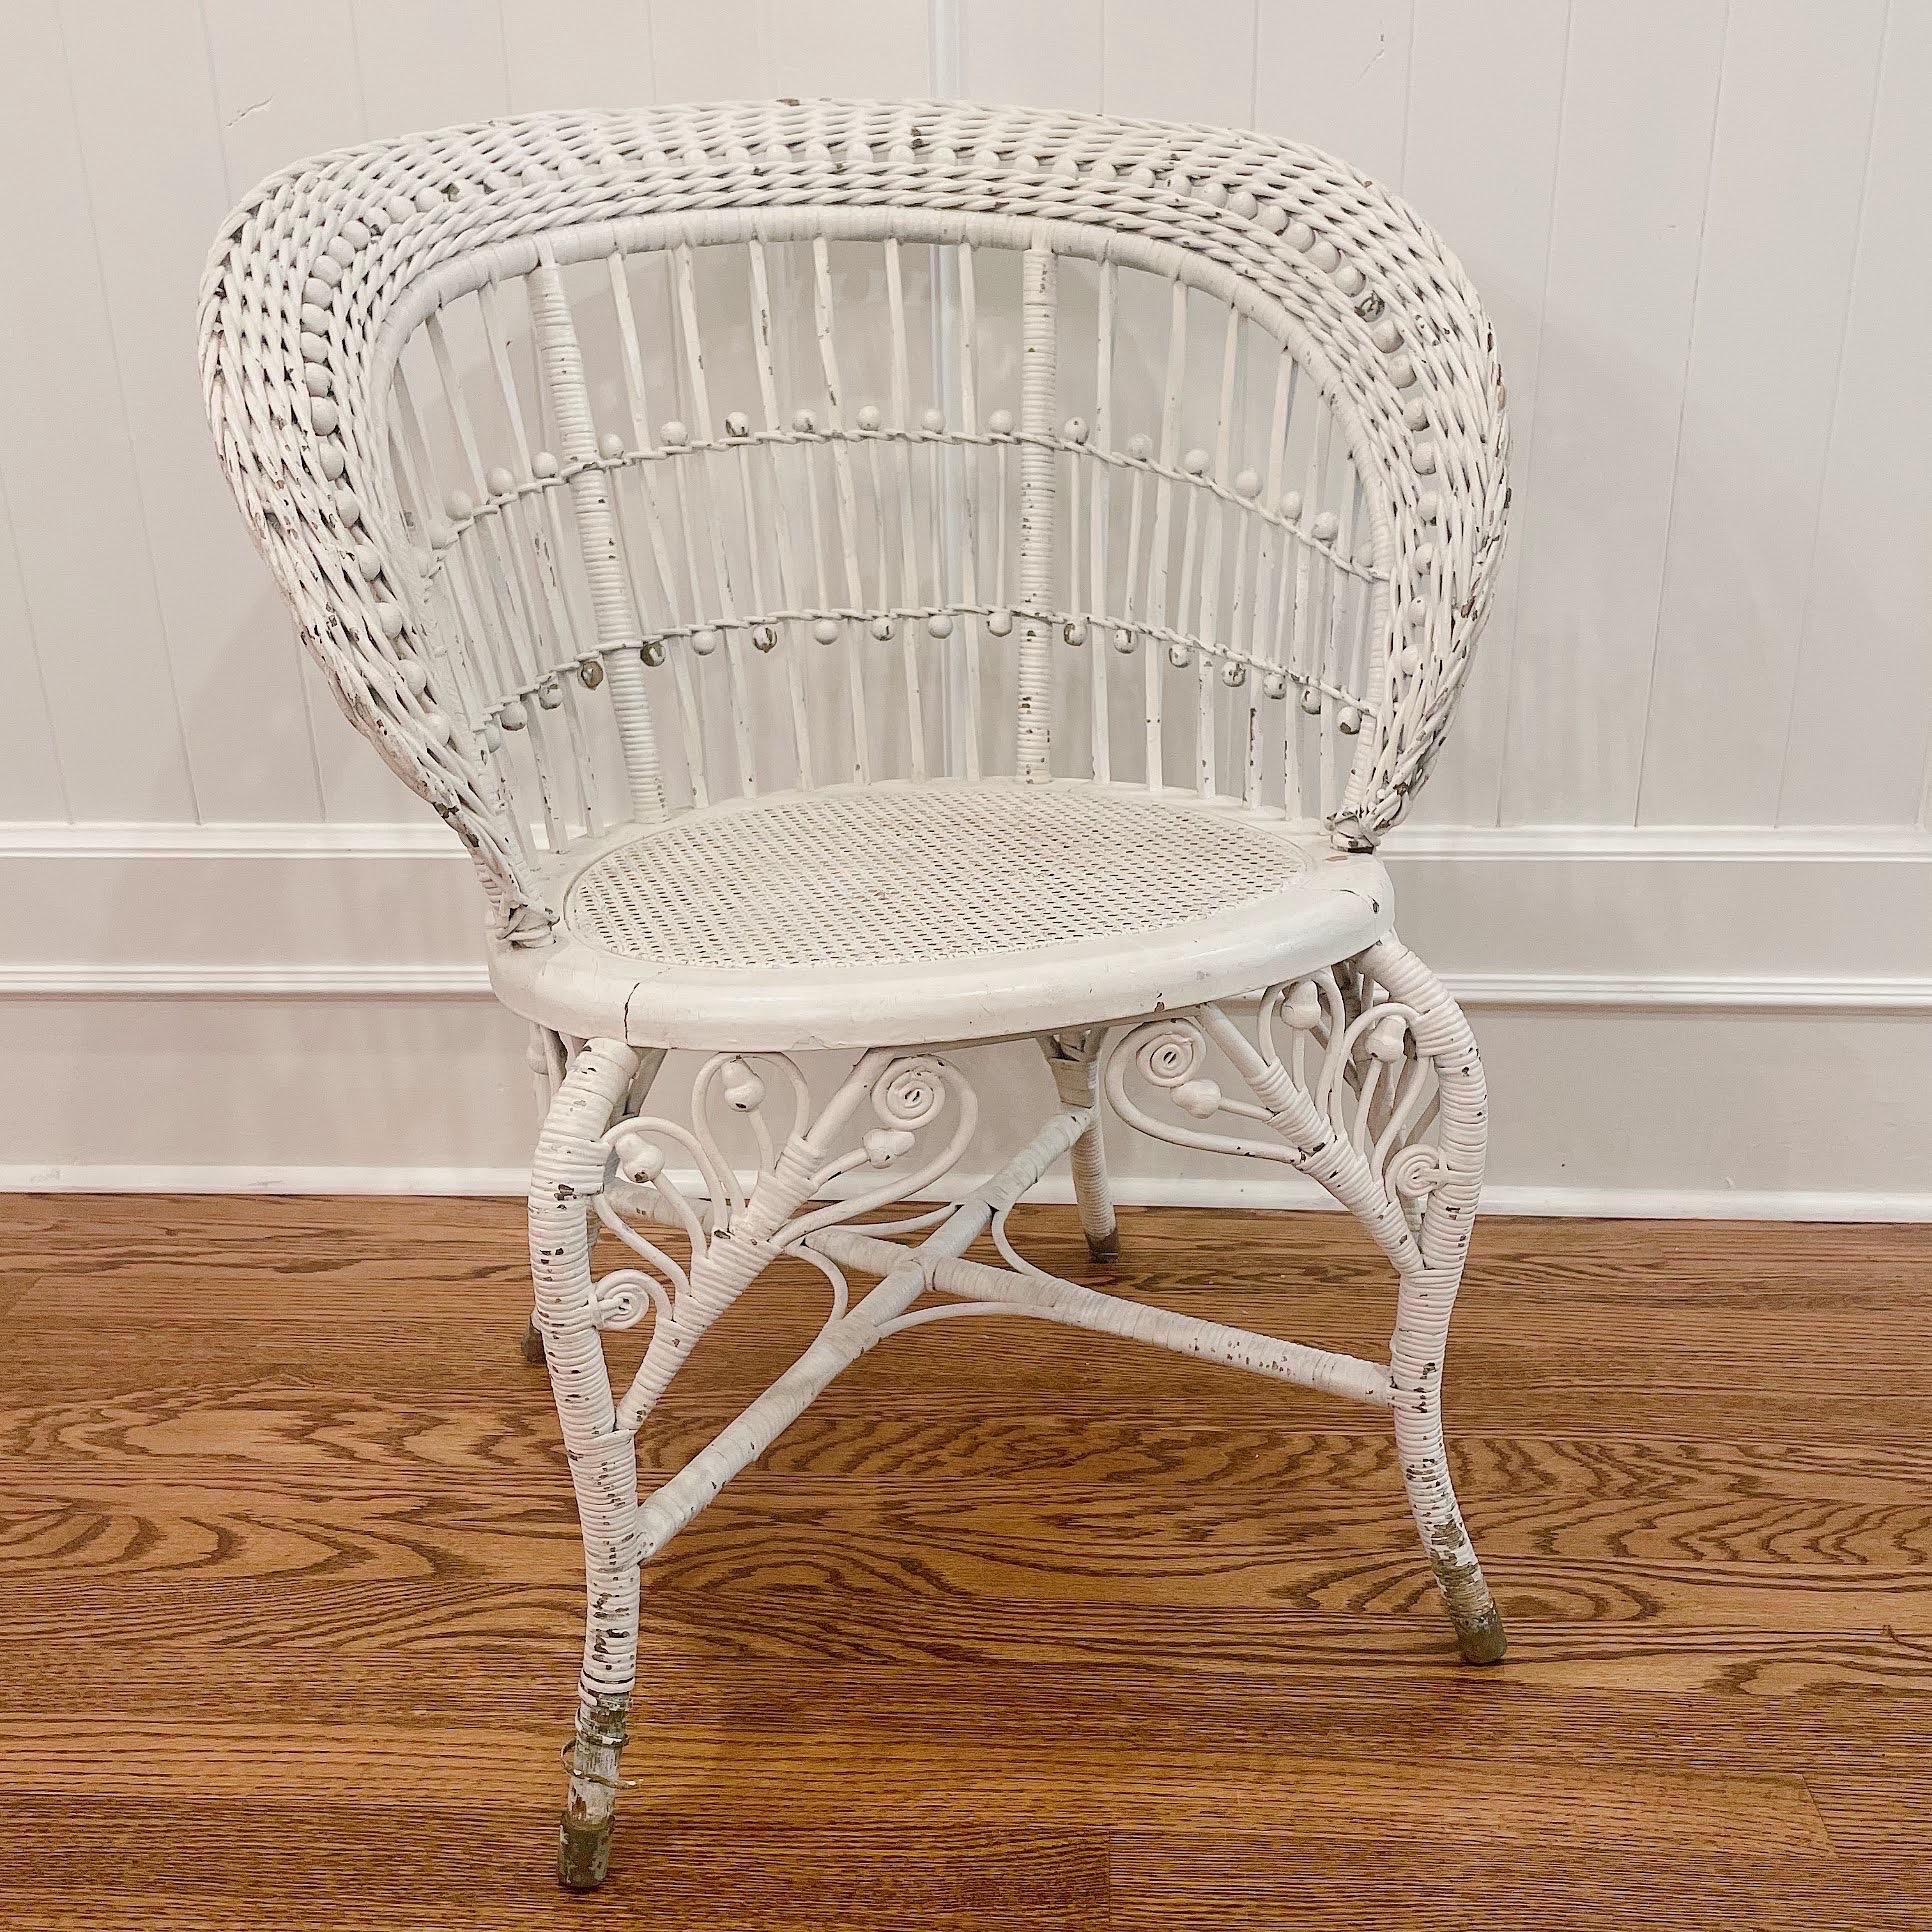 Antique Victorian Heywood Wakefield (attr) Ball & Stick Wicker Chair, Circa 1890 In Good Condition For Sale In Cookeville, TN